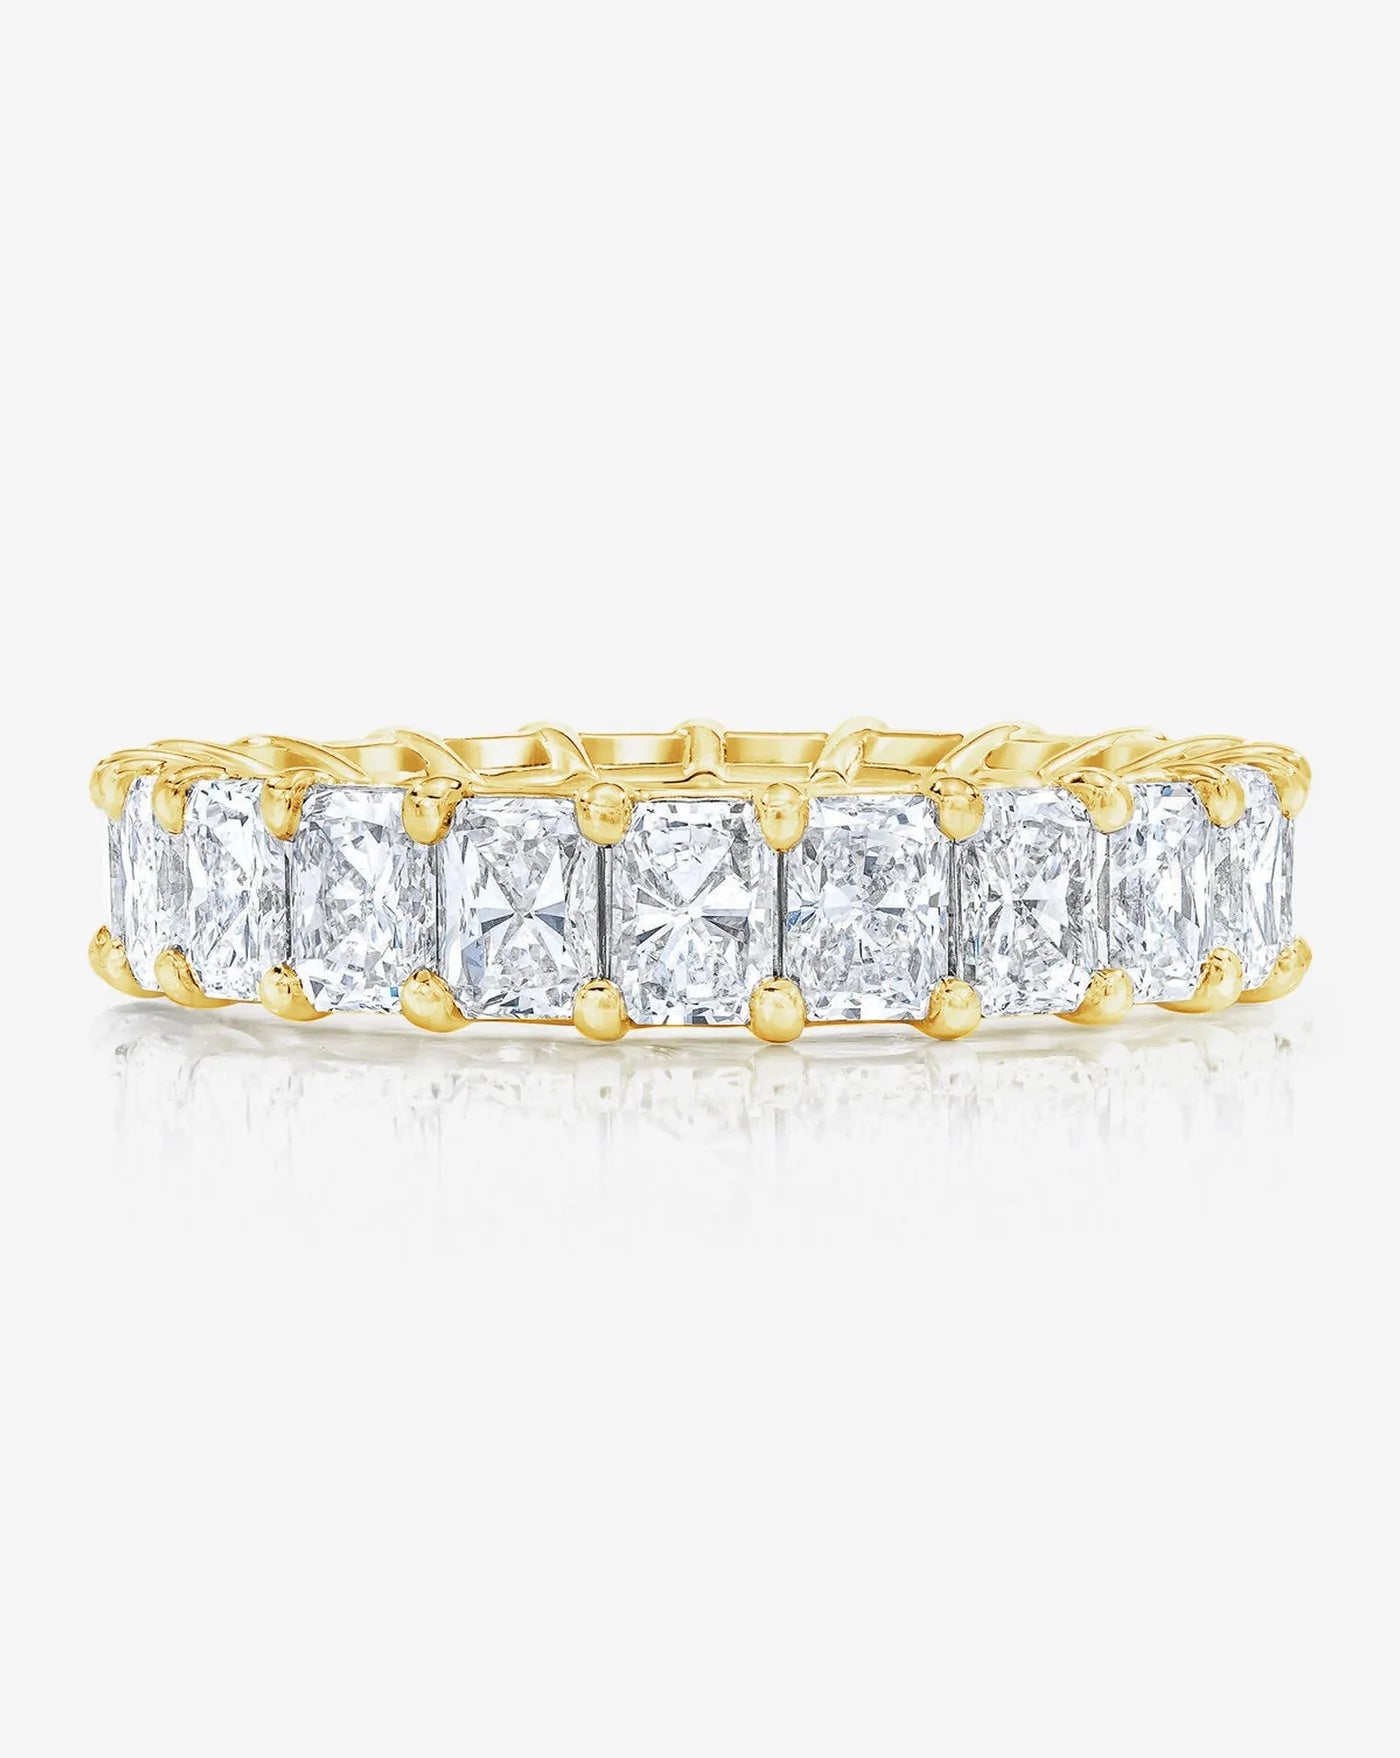 Petite Radiant Eternity Band in 14K Yellow Gold